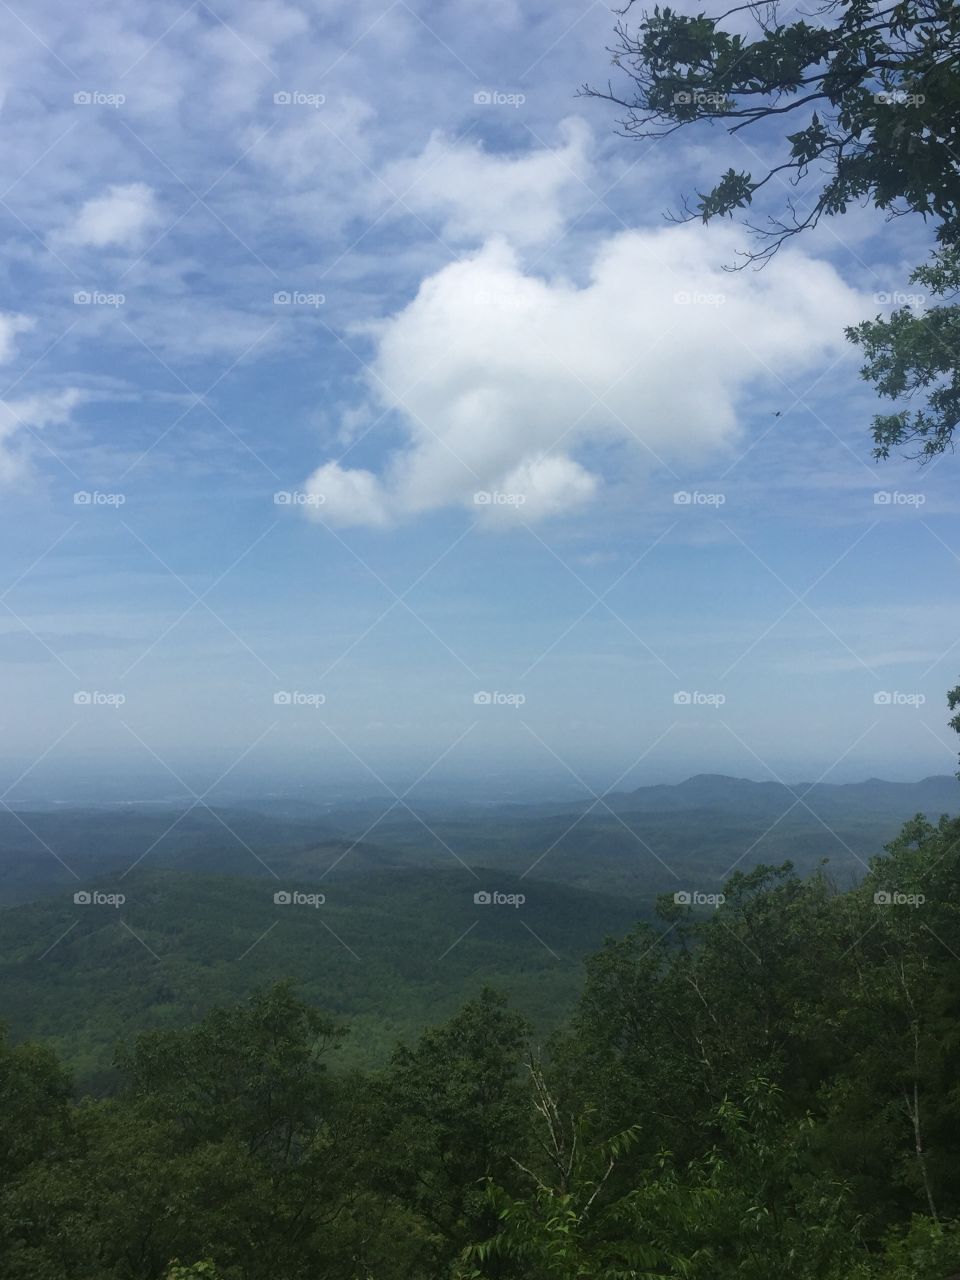 View of the North Georgia mountains
